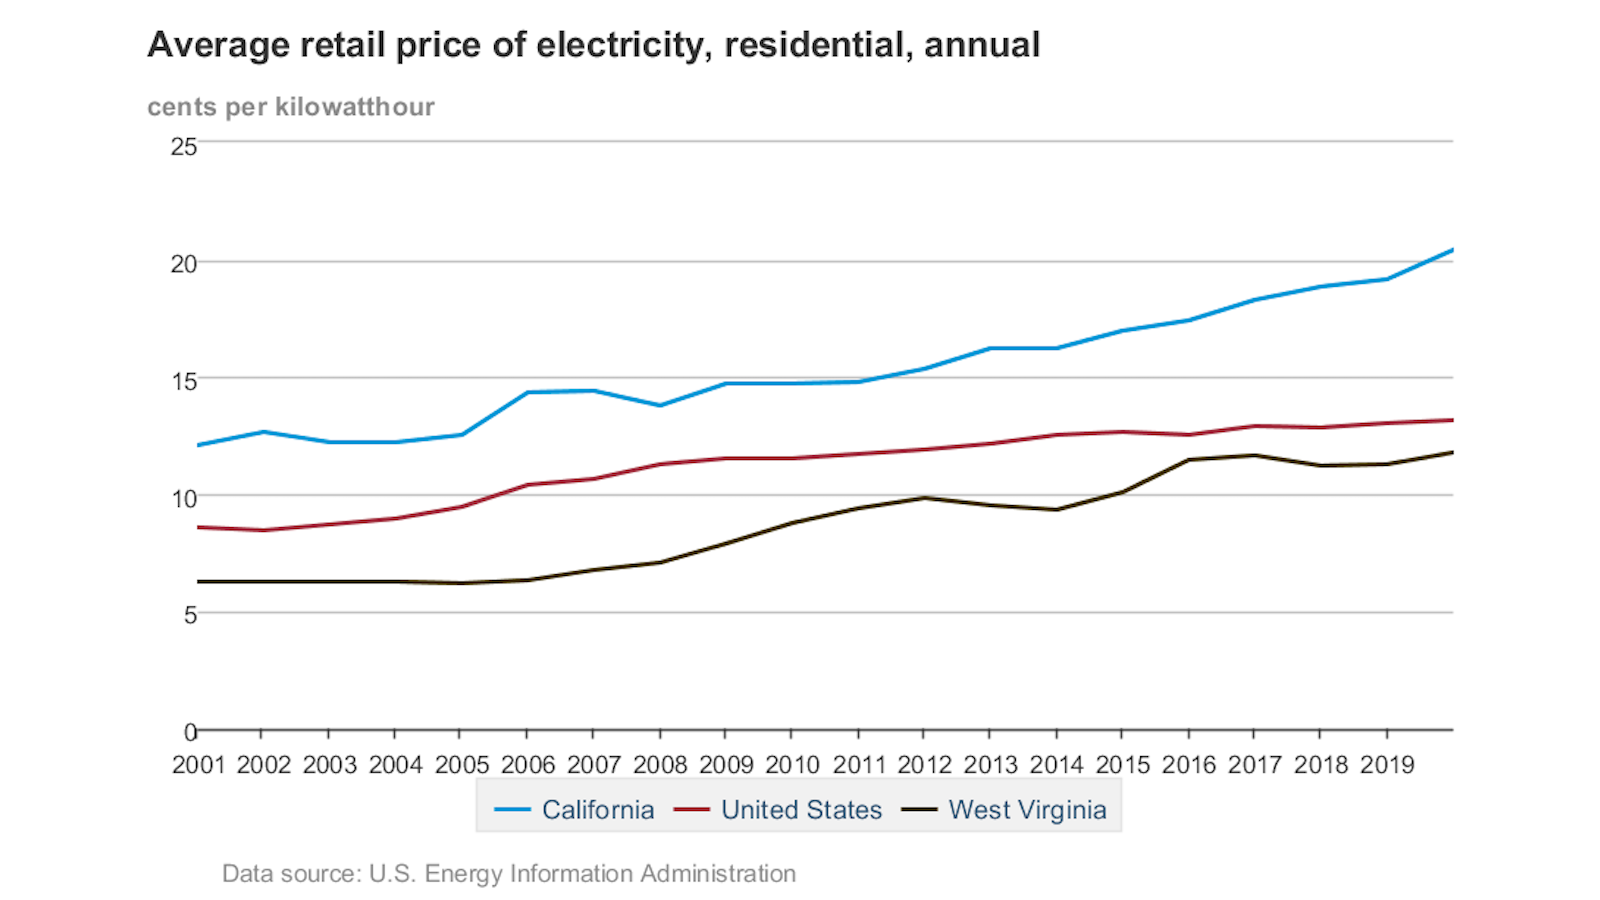 WV electricity prices